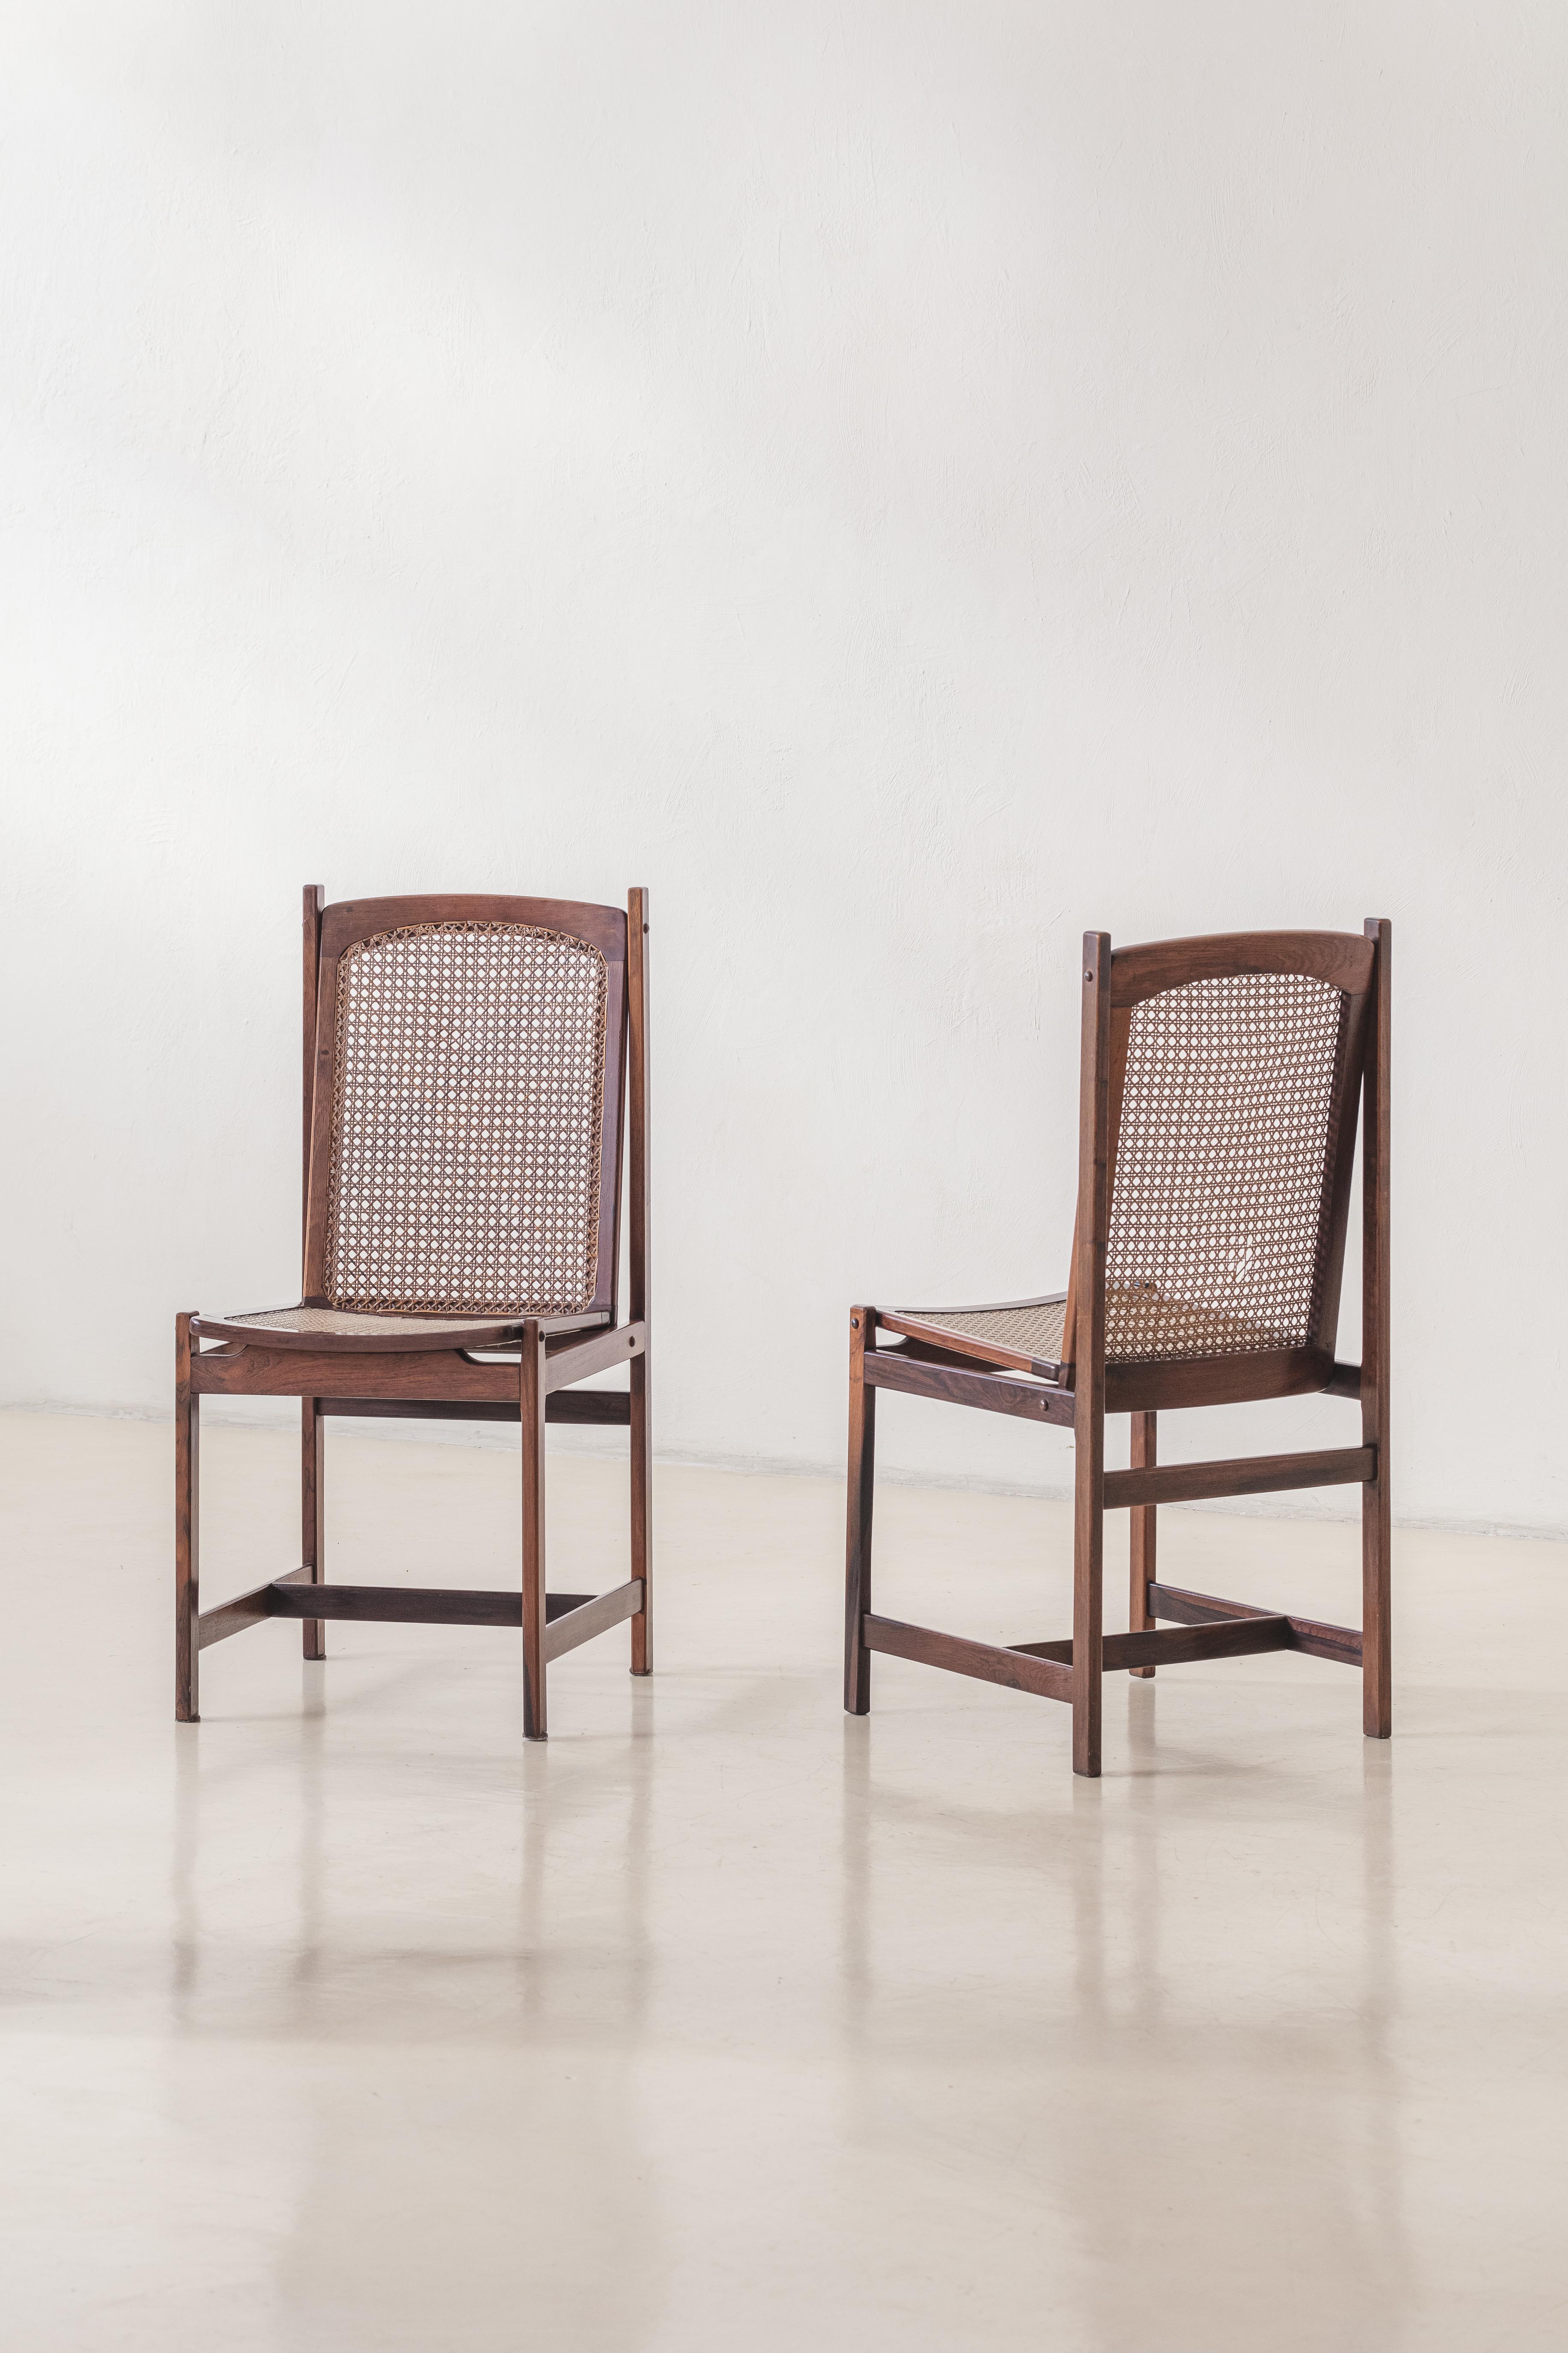 Celina Decorações Set of Six Dining Chairs, Rosewood and Cane, Midcentury 1960s In Good Condition For Sale In New York, NY